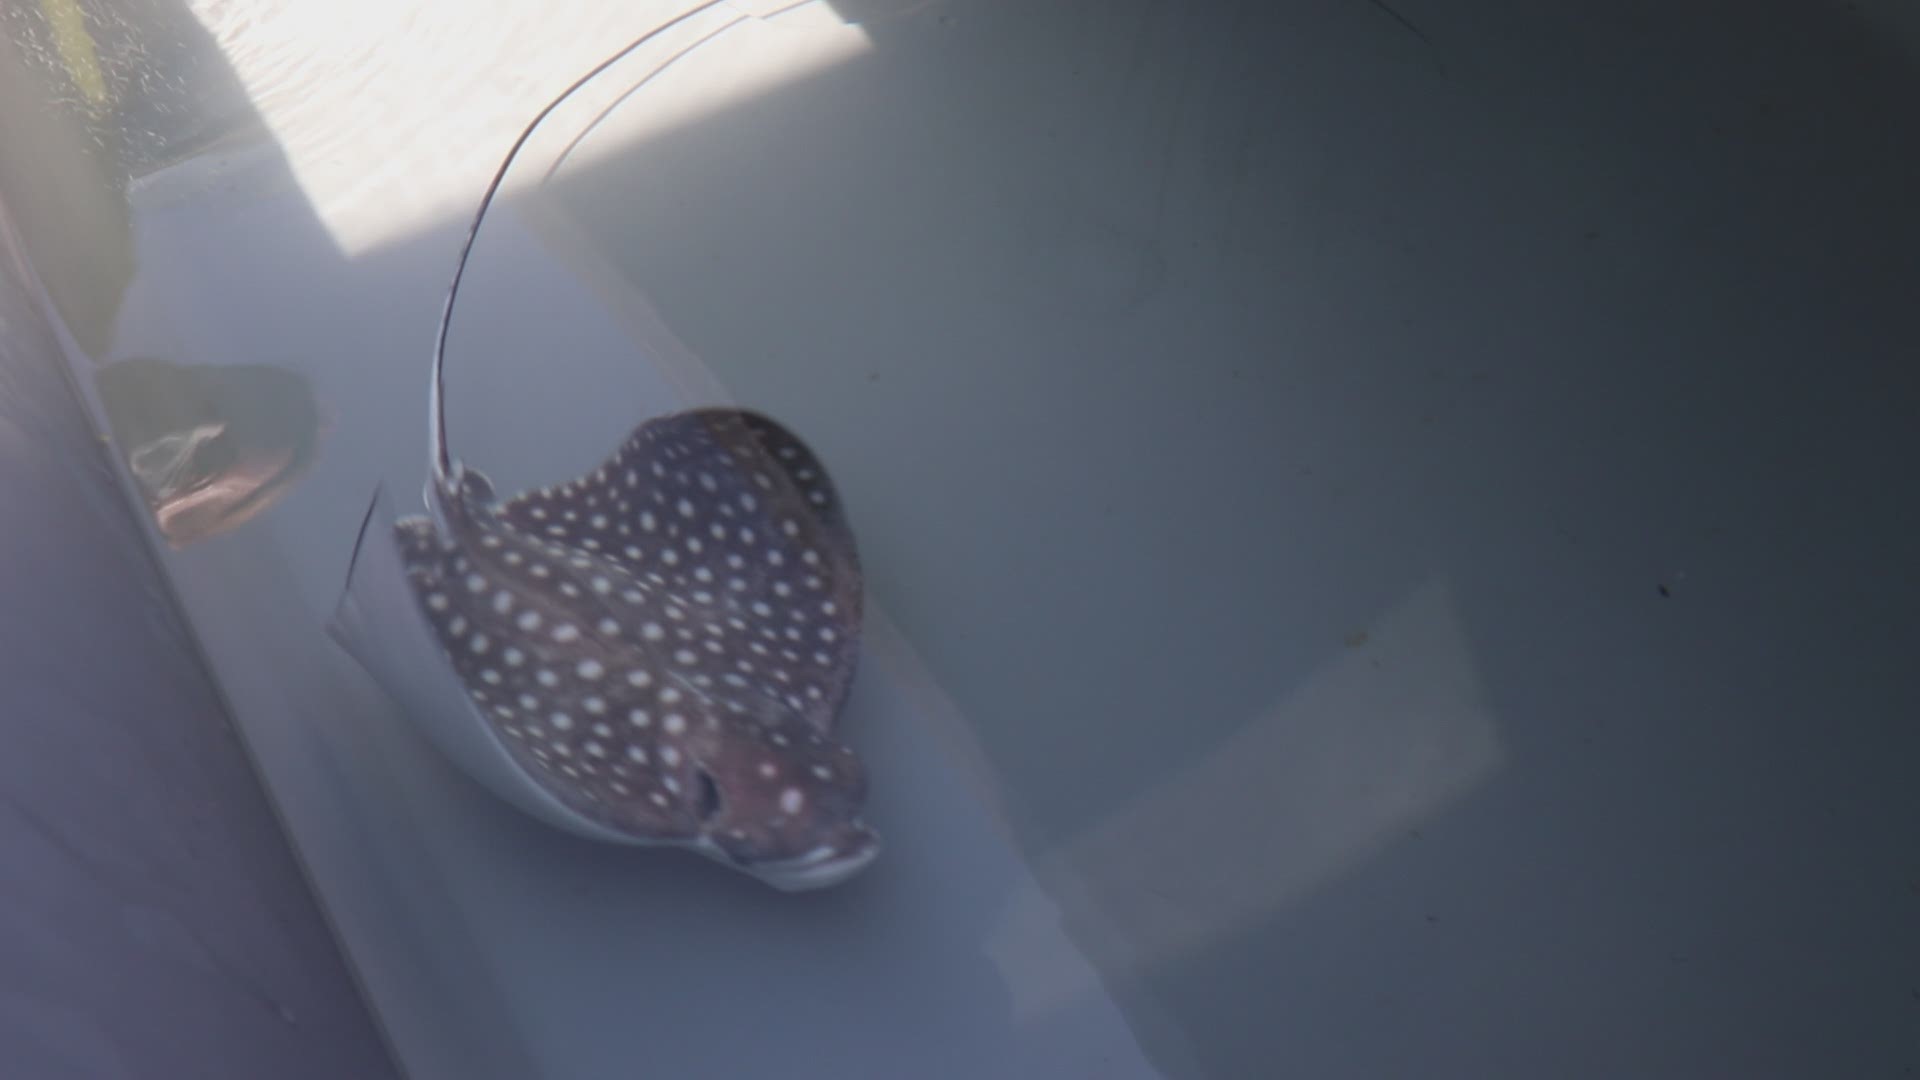 The Virginia Aquarium welcomed a spotted eagle ray pup on July 20, 2020.